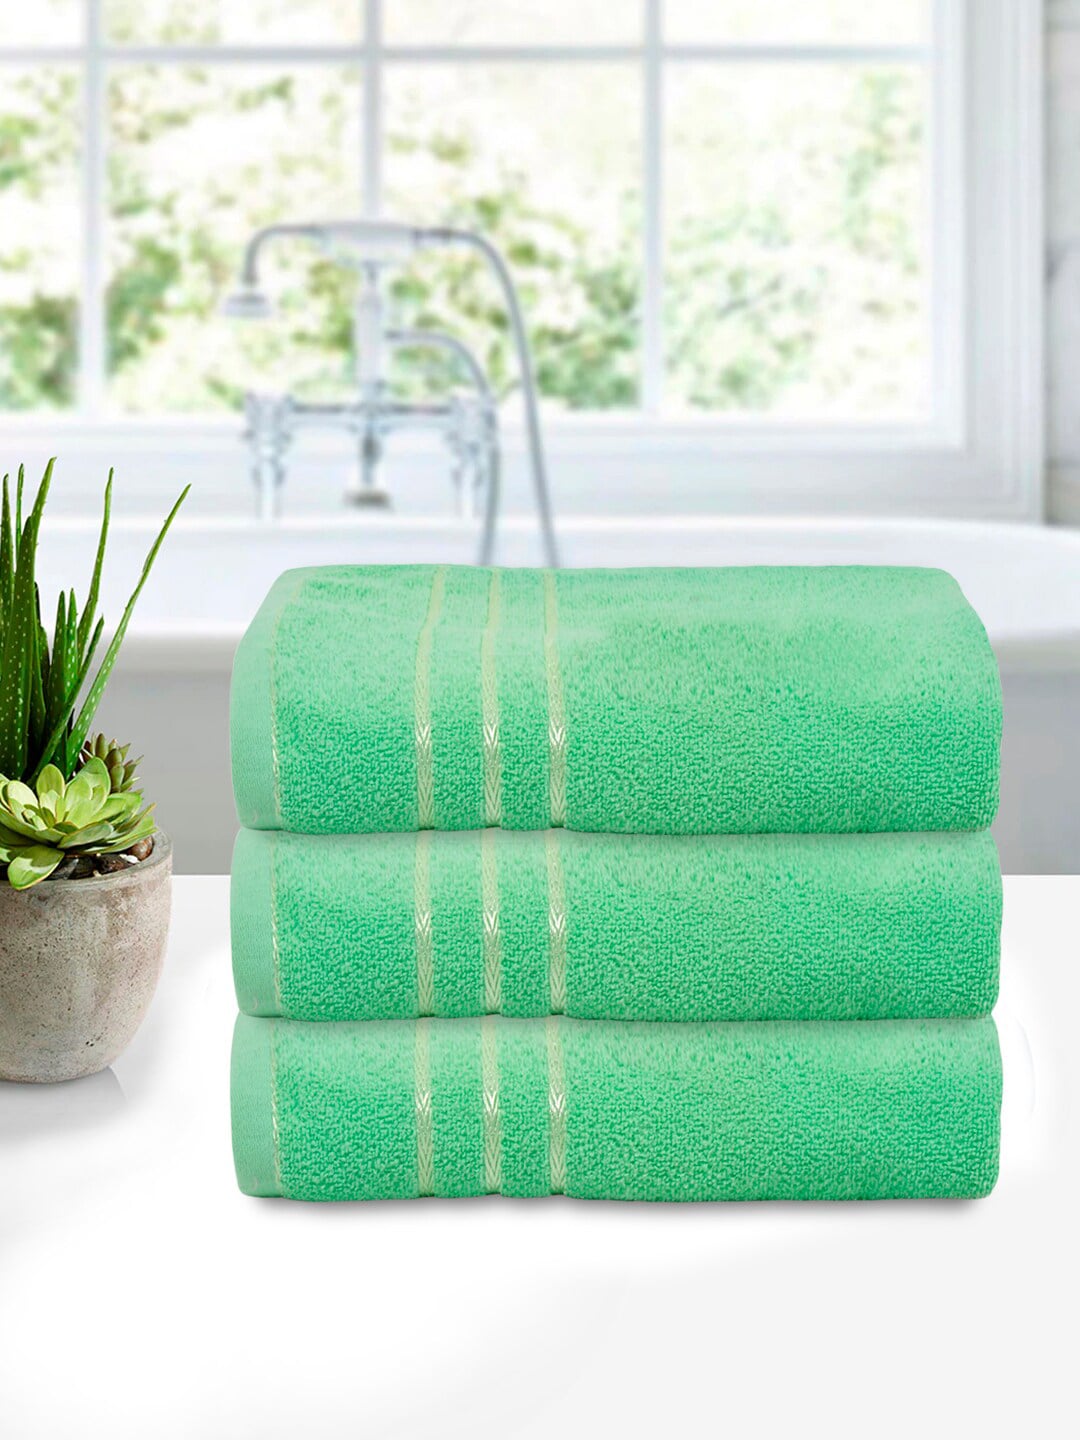 Kuber Industries Set of 3 Green Cotton Bath Towels Price in India